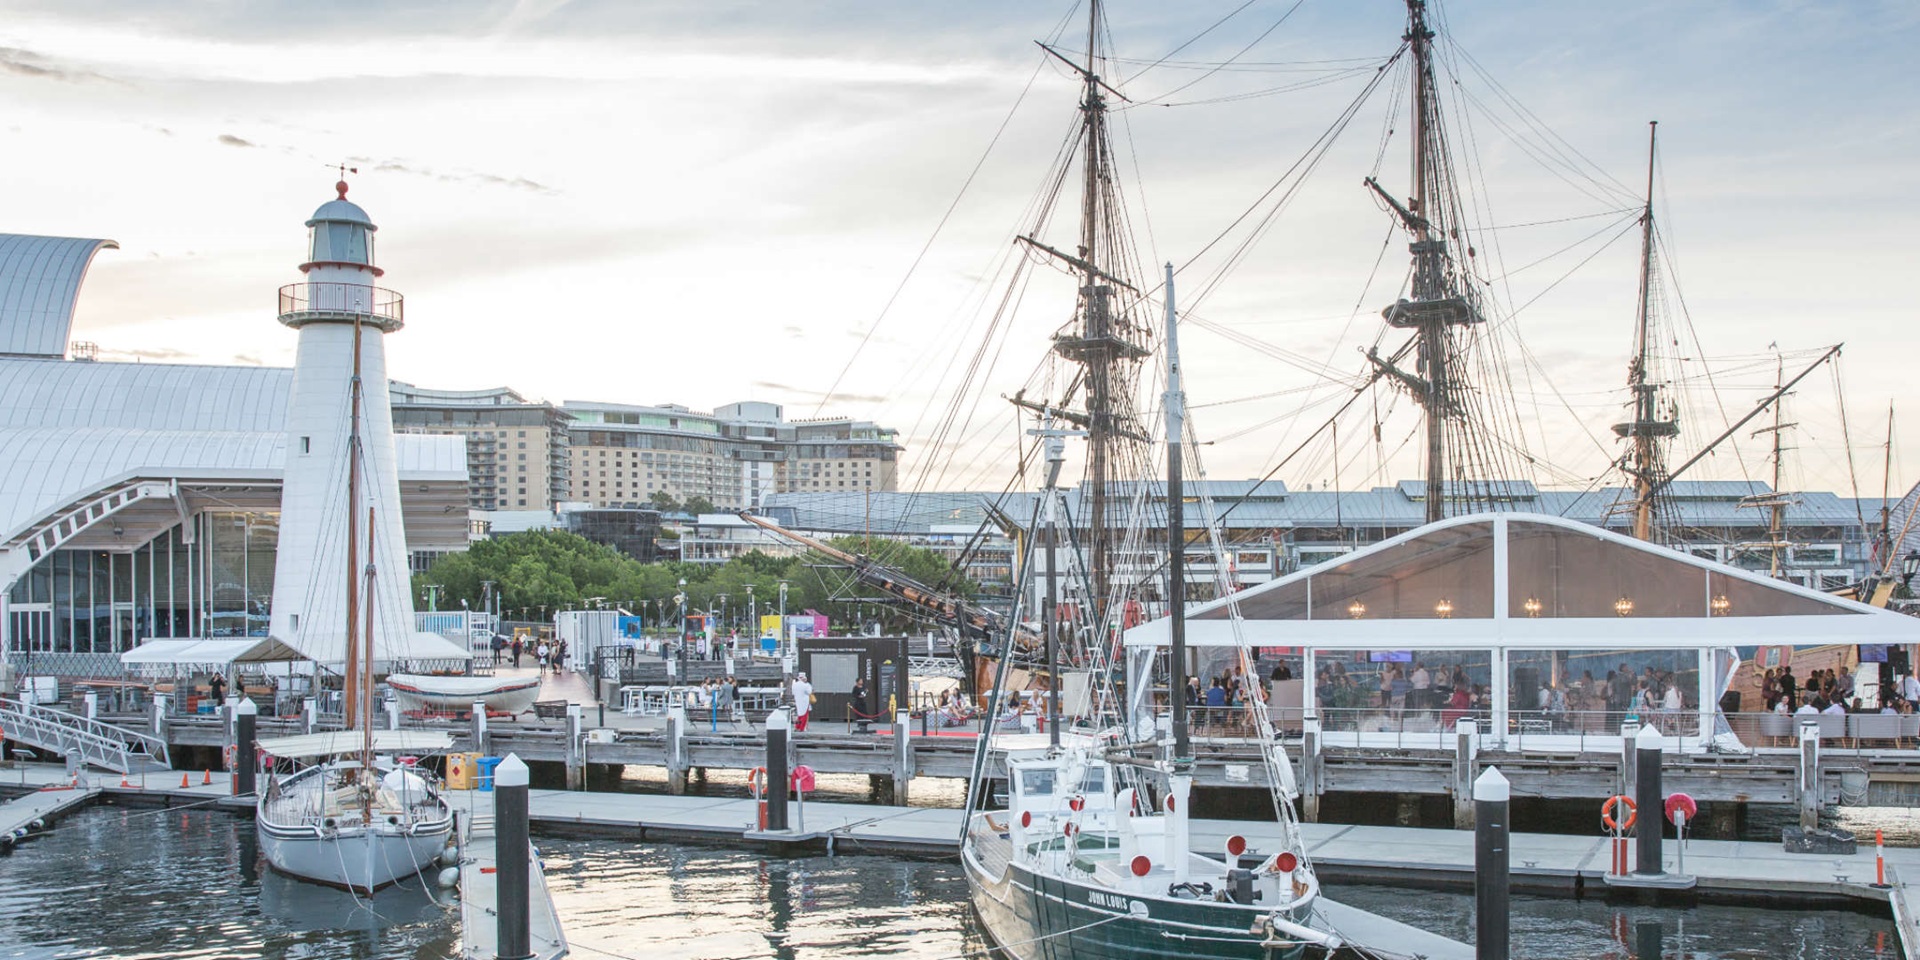 This space located next to HMB Endeavour offers stunning waterfront views overlooking Darling Harbour.